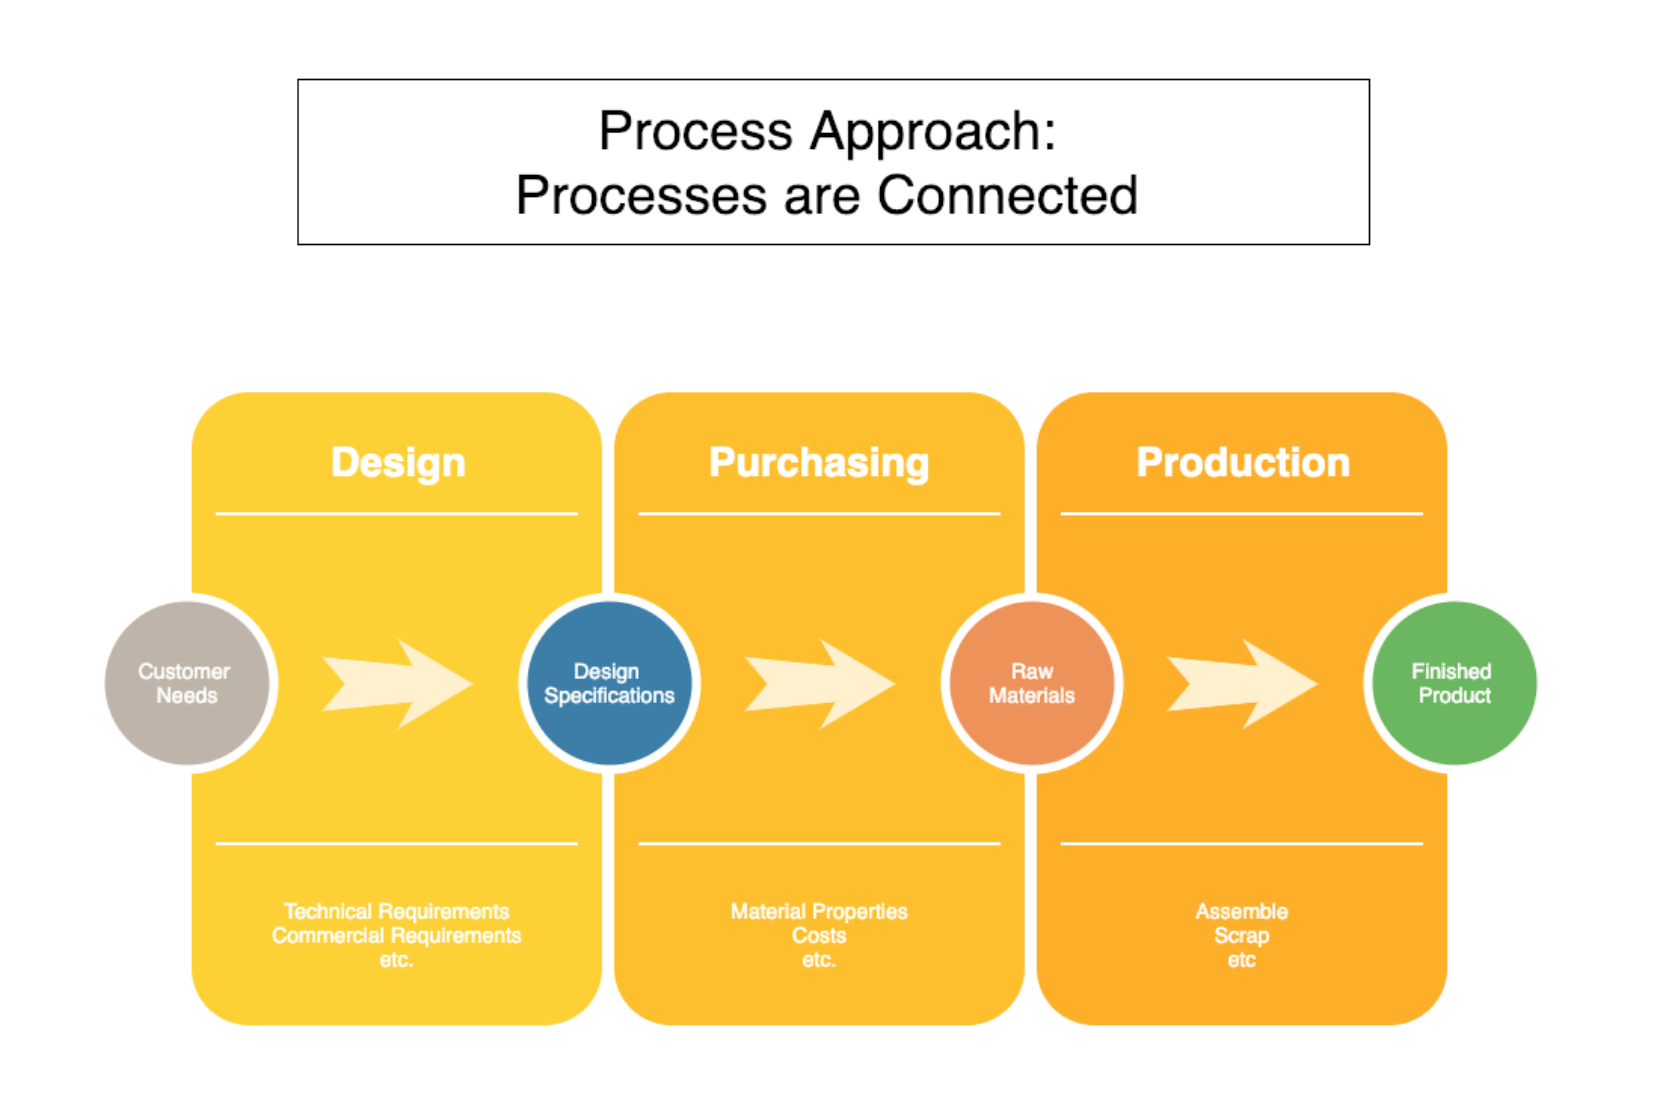 What is a Process Approach? - 9000 Store